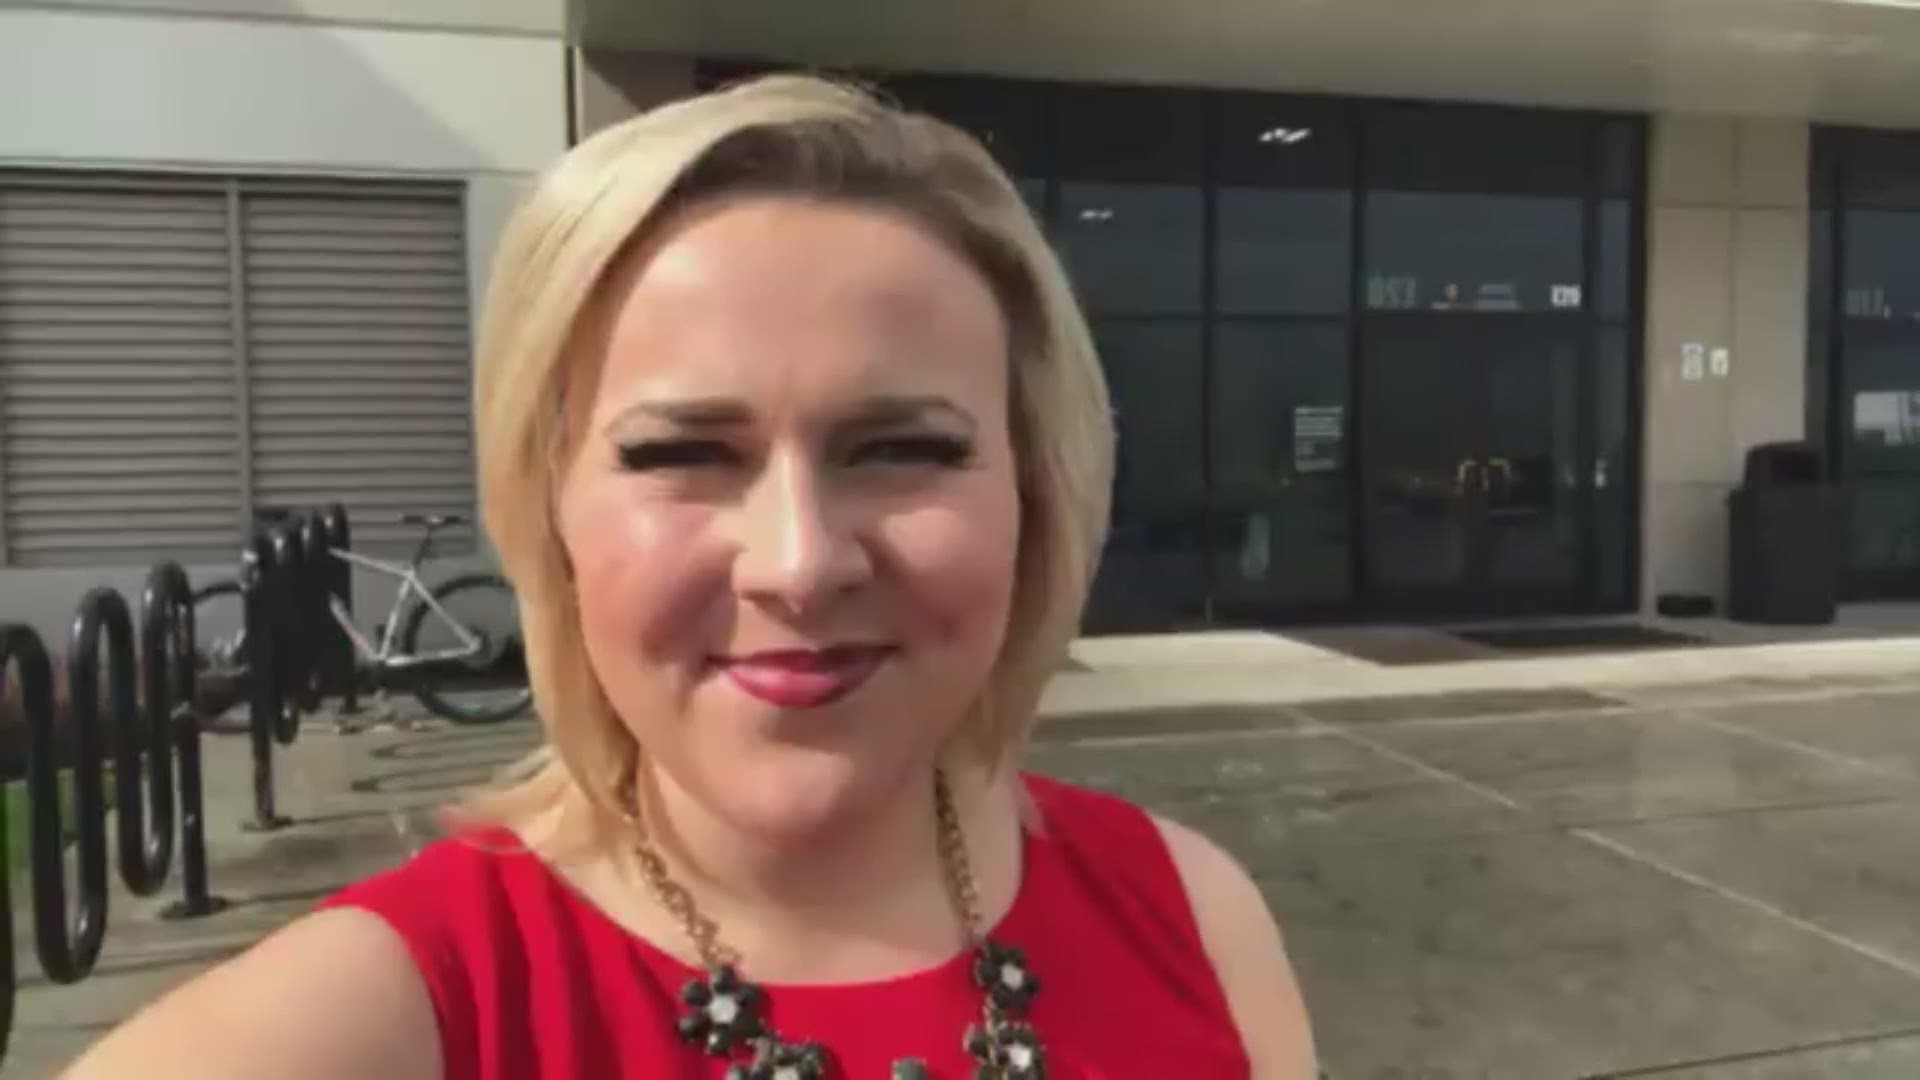 On Thursday ABC10's Lena Howland took a tour of the Amazon.com Fulfillment Center in Tracy, Calif. "It was my first time here and the tour definitely did not disappoint," Lena said. Here’s a quick recap of what she saw inside!